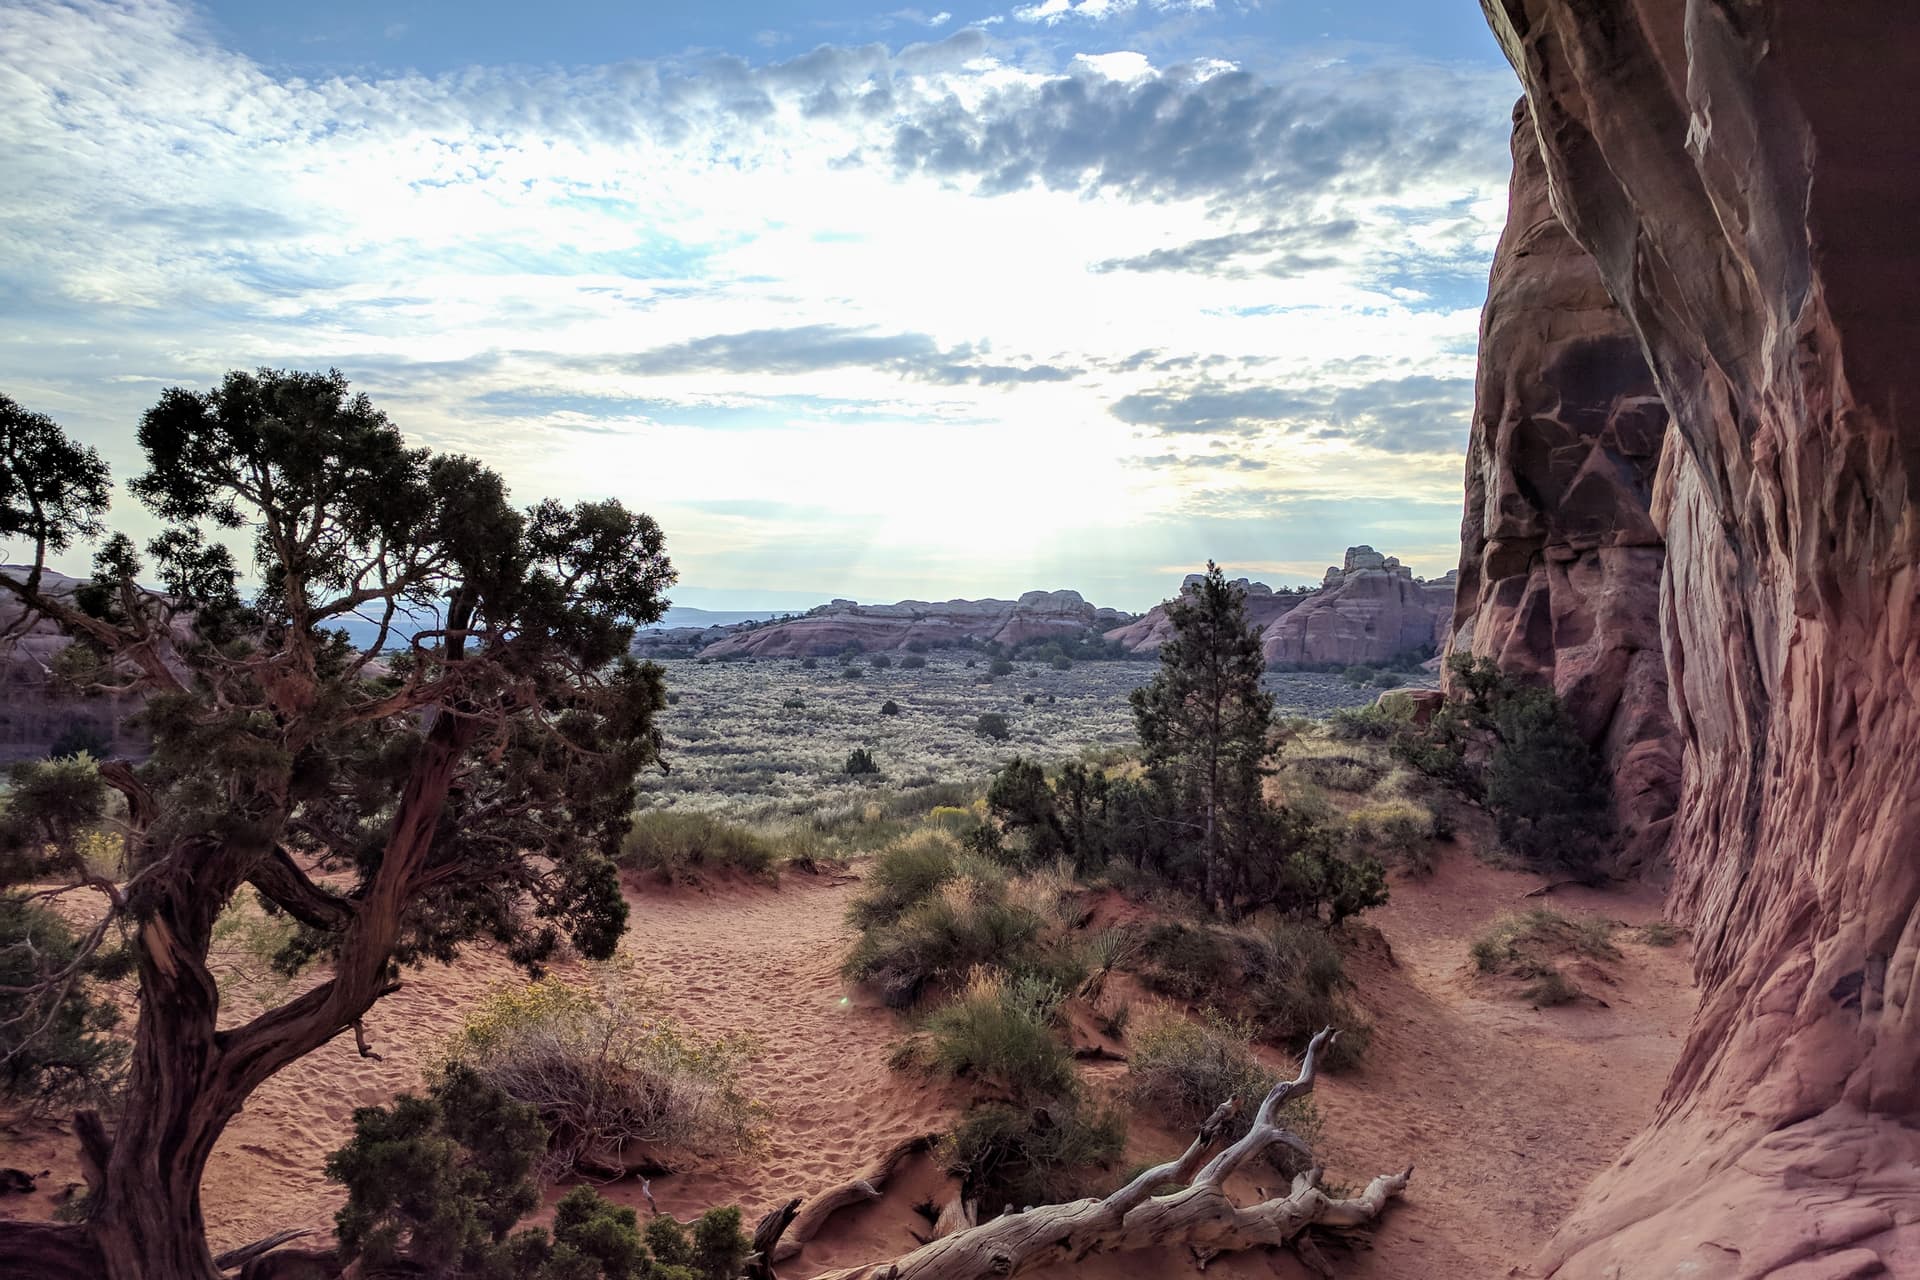 An oblique view through Pine Tree Arch in Arches National Park towards the rising sun. Unusually shaped sandstone mounds and pillars can be seen in the distance.